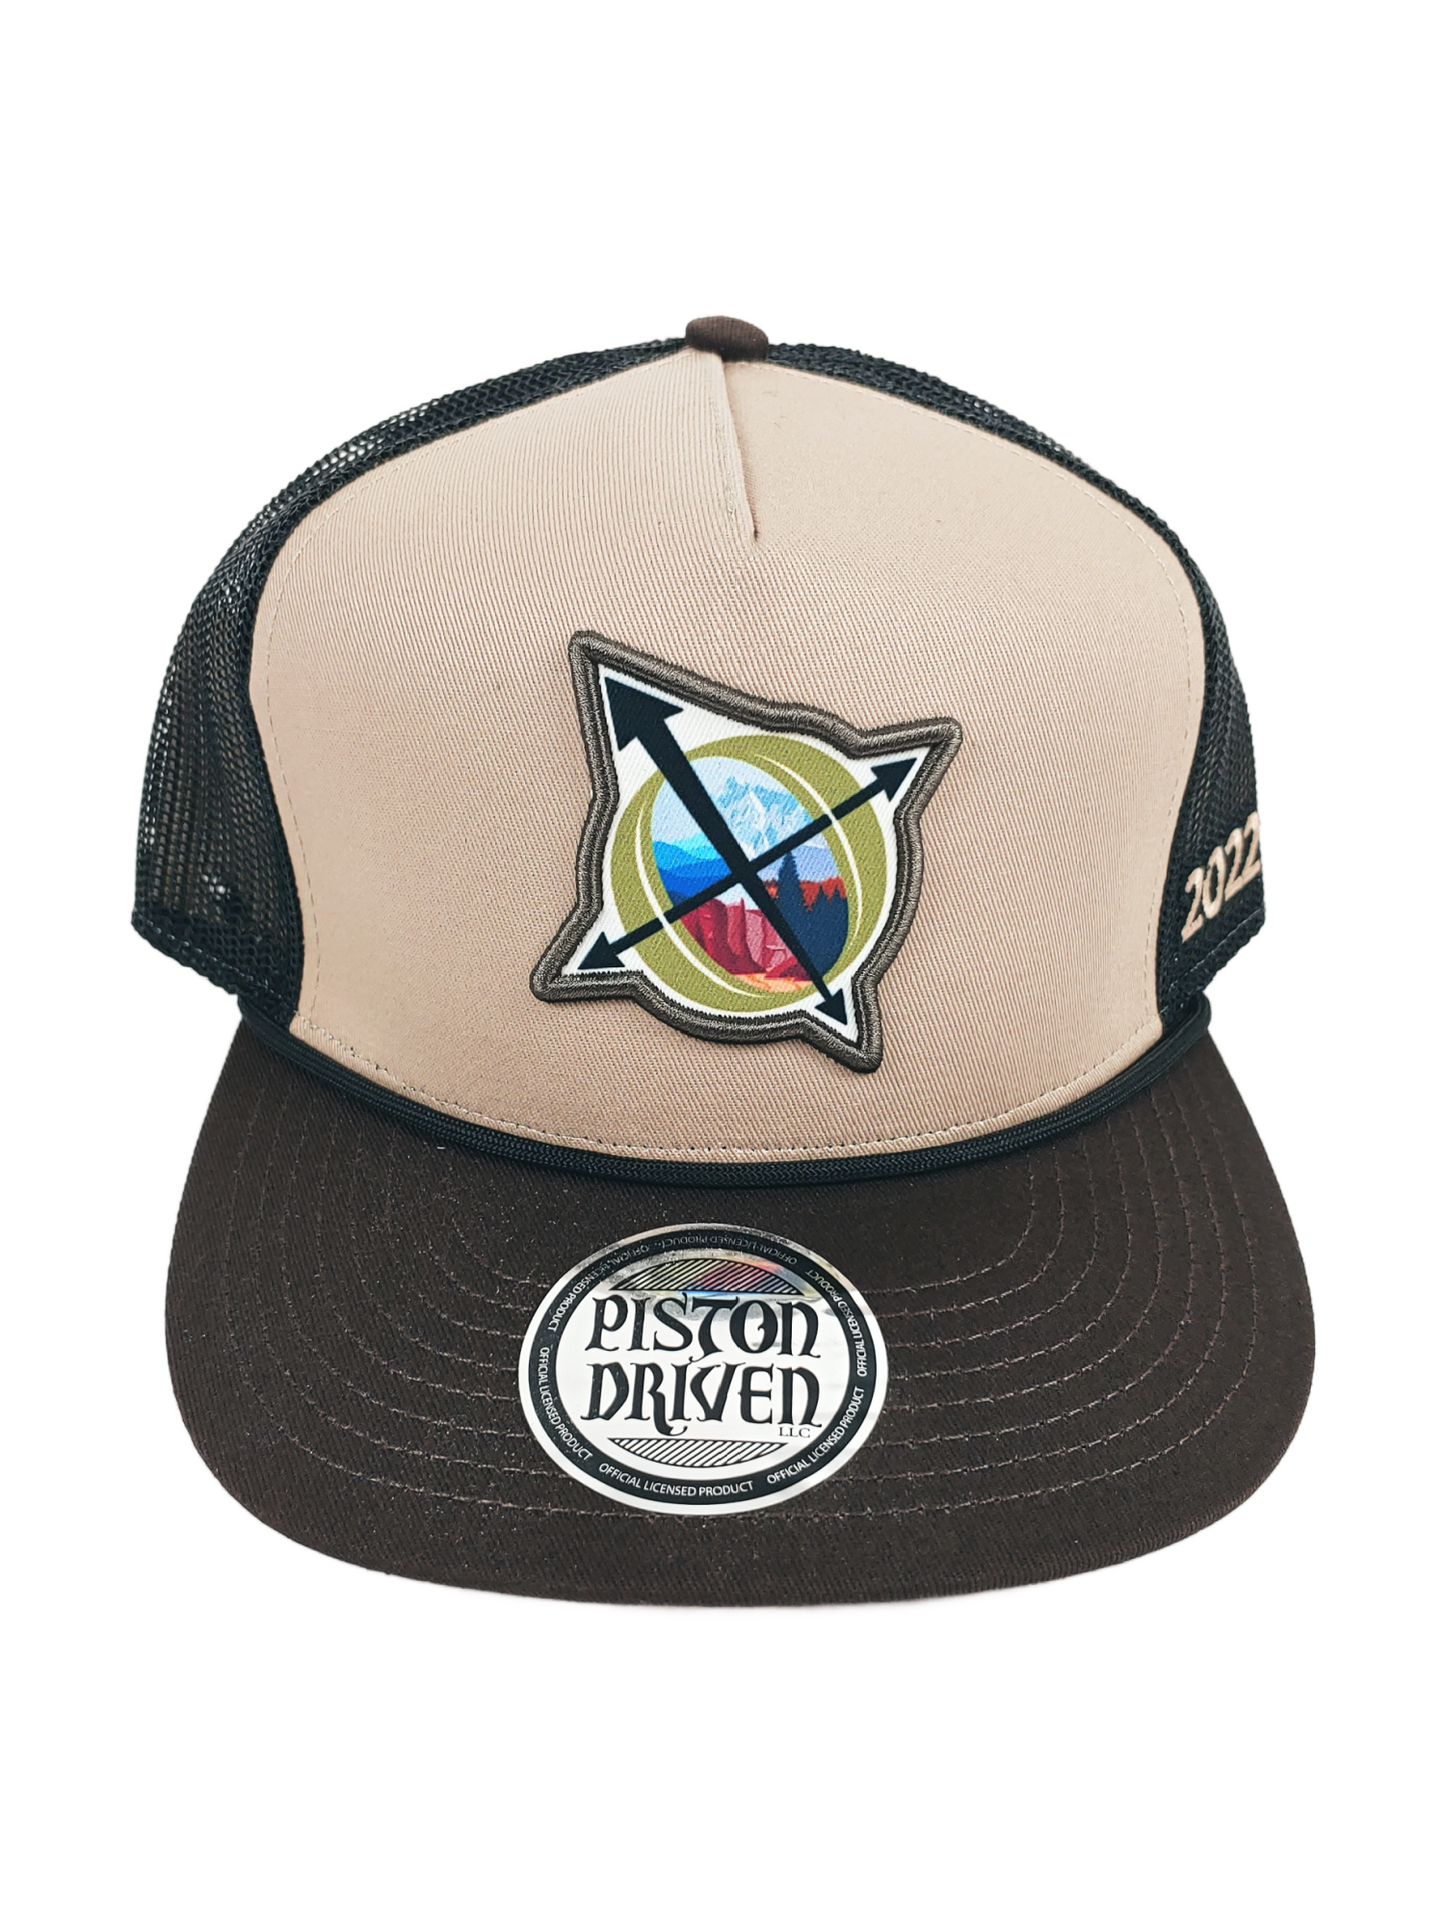 Overland Expo 2022 - Embroidered Compass - Flat Billed Trucker Hat